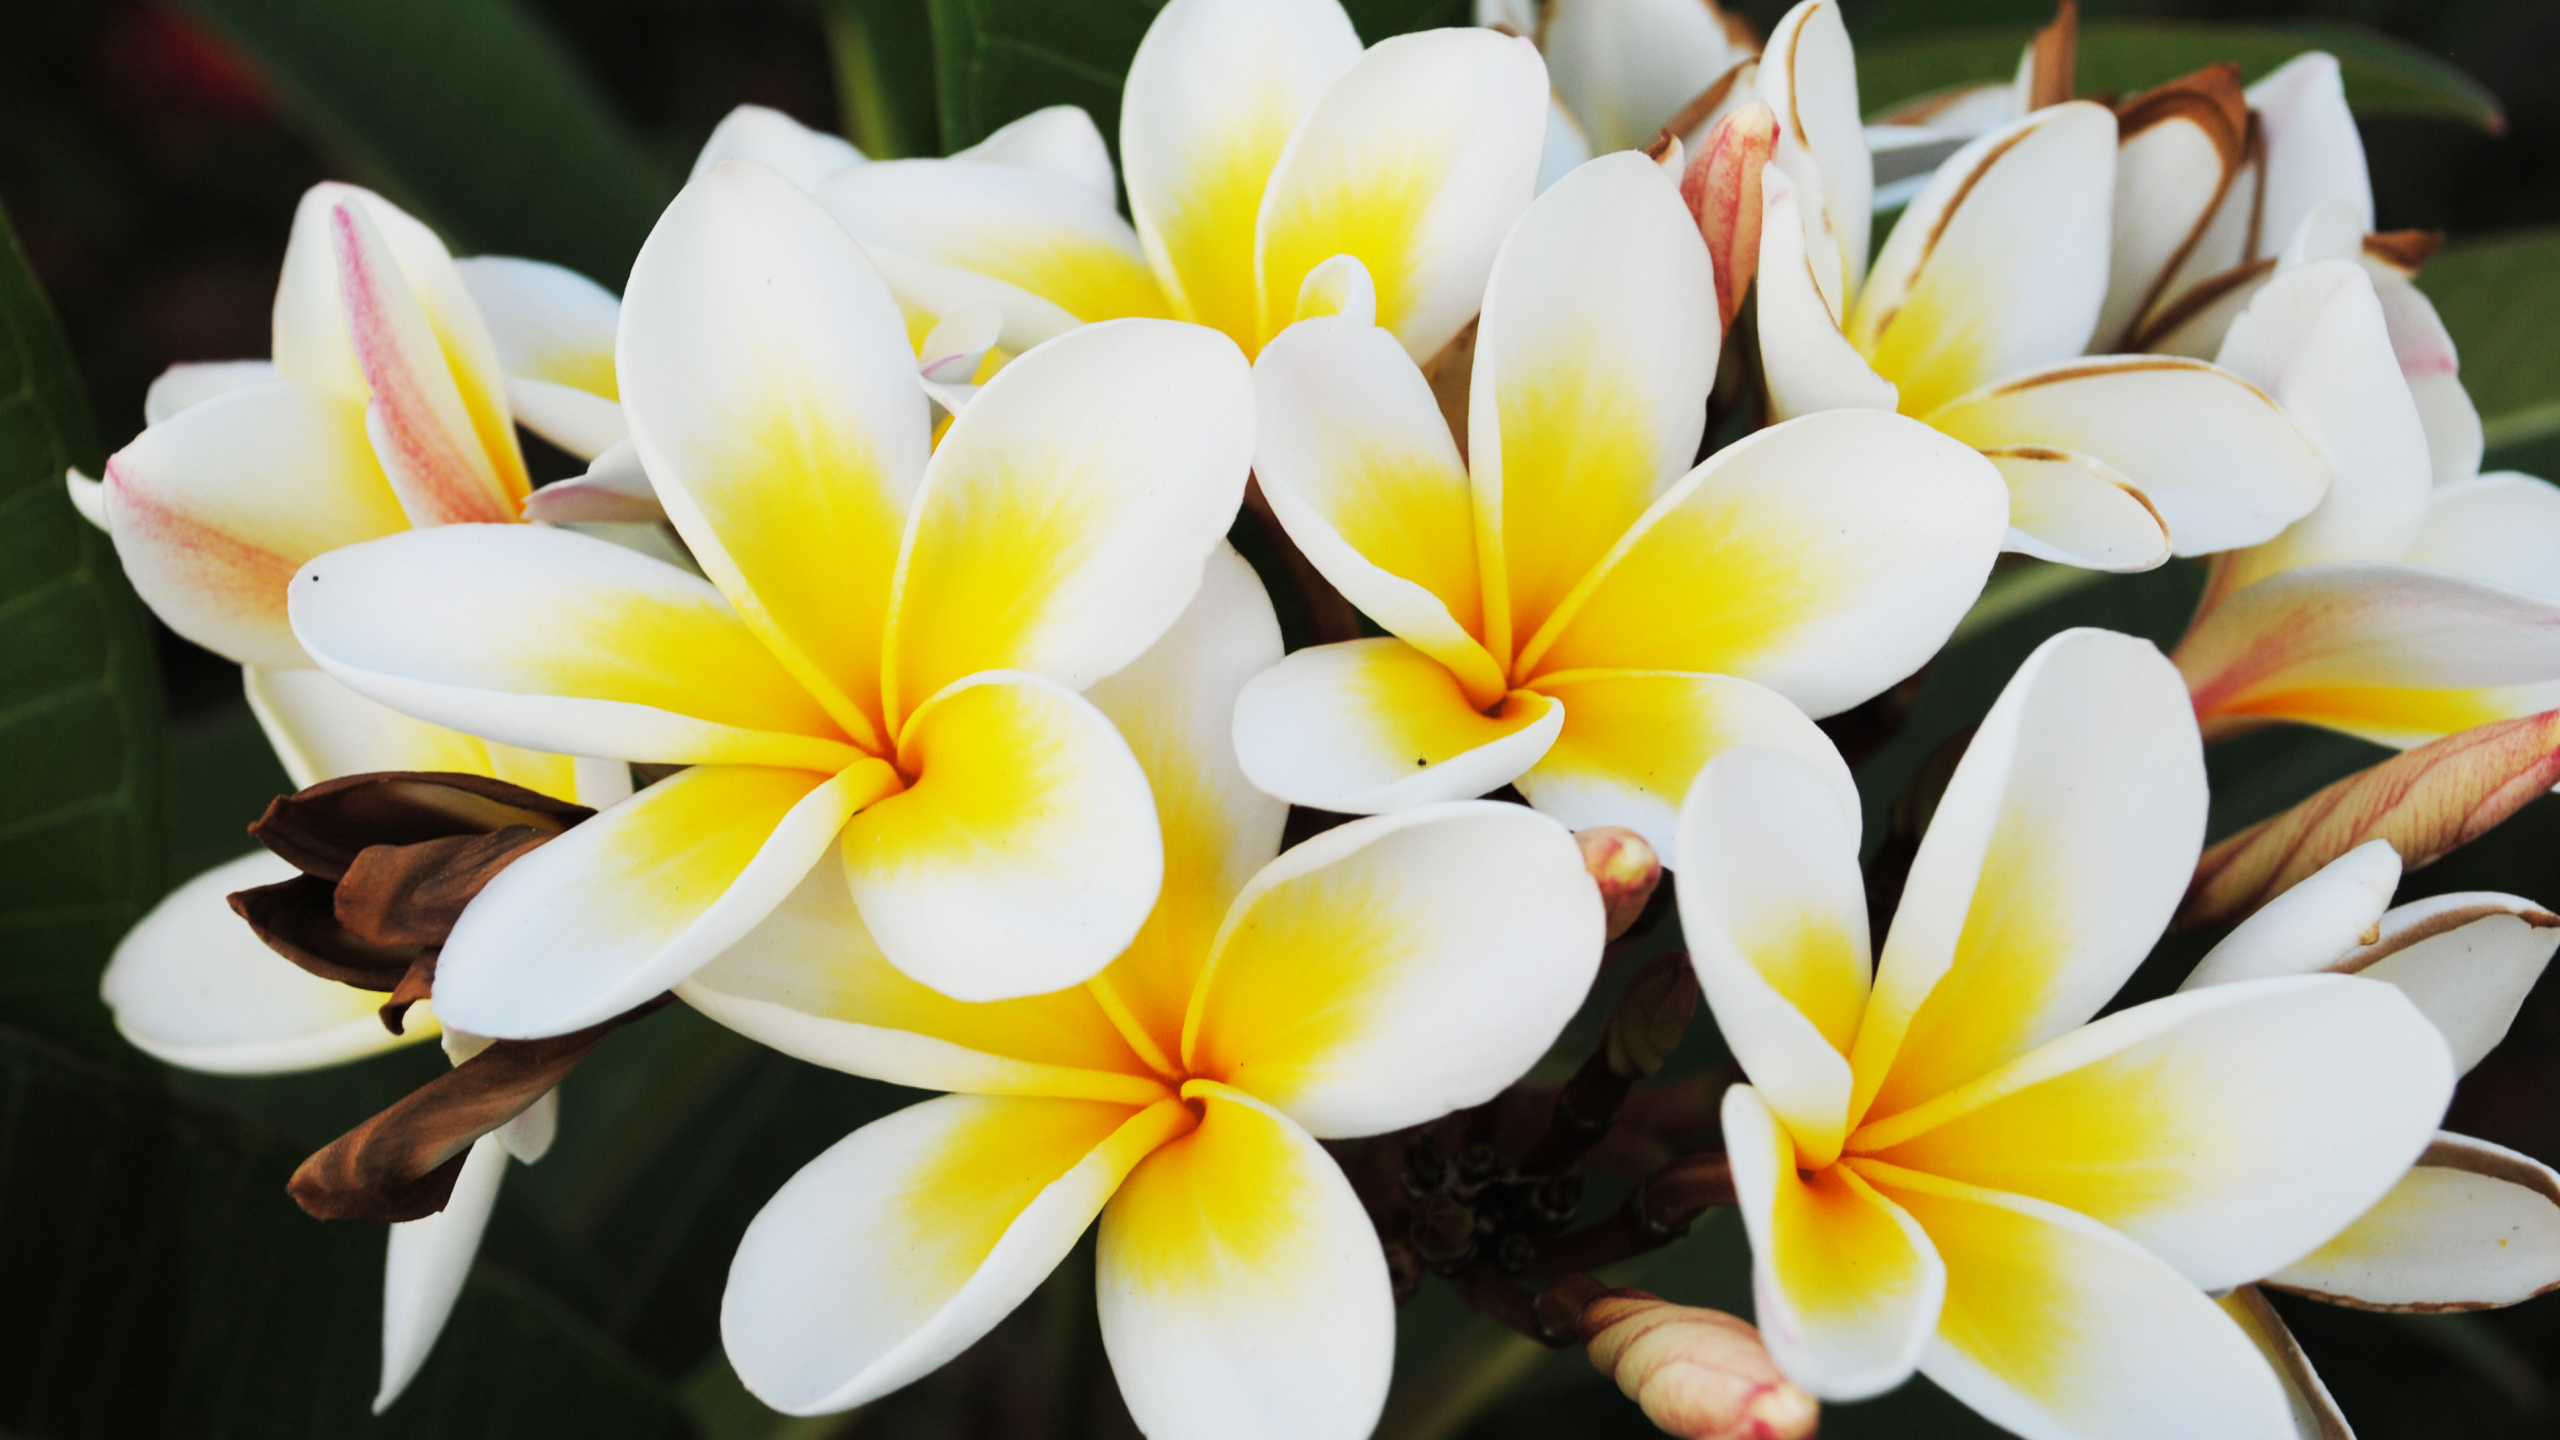 White and Yellow Flower in Close up Photography. Wallpaper in 2560x1440 Resolution